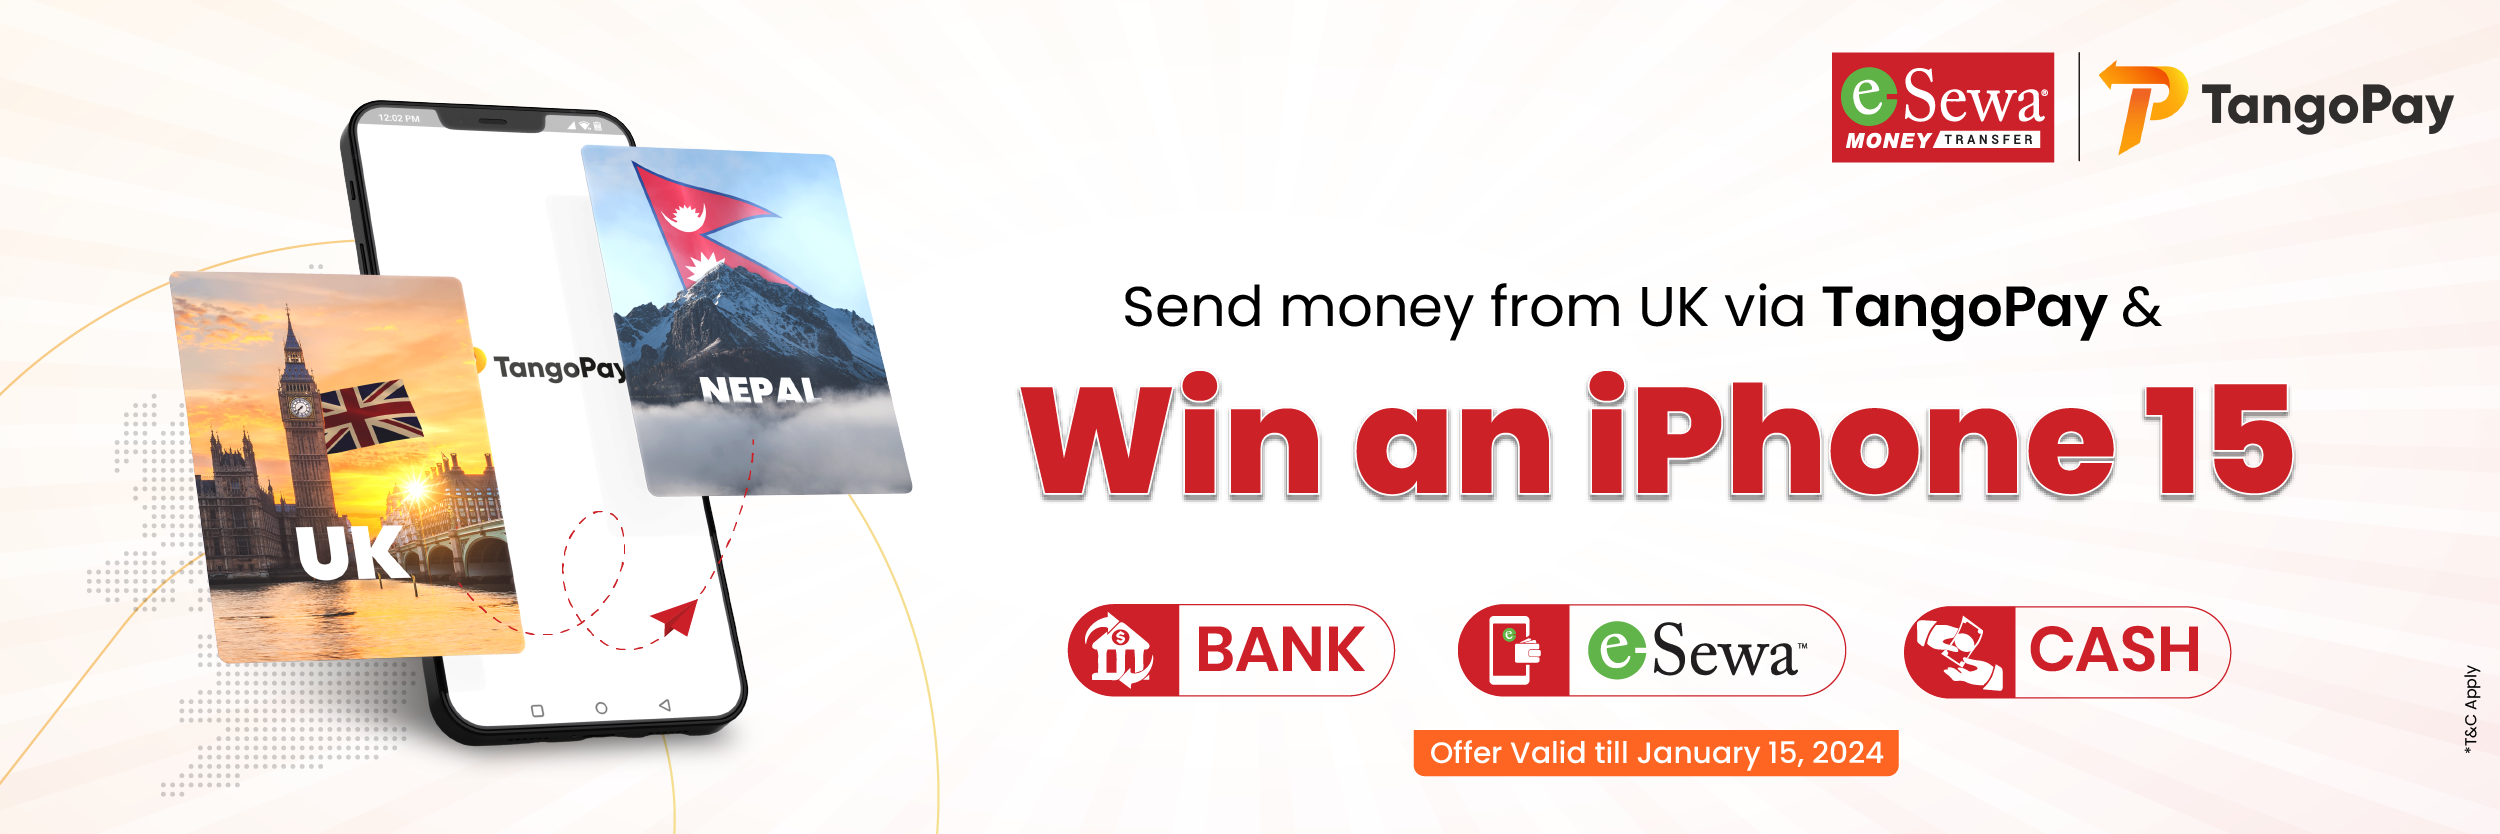 Send money from UK via TangoPay and get a chance to win an iPhone 15! - Banner Image